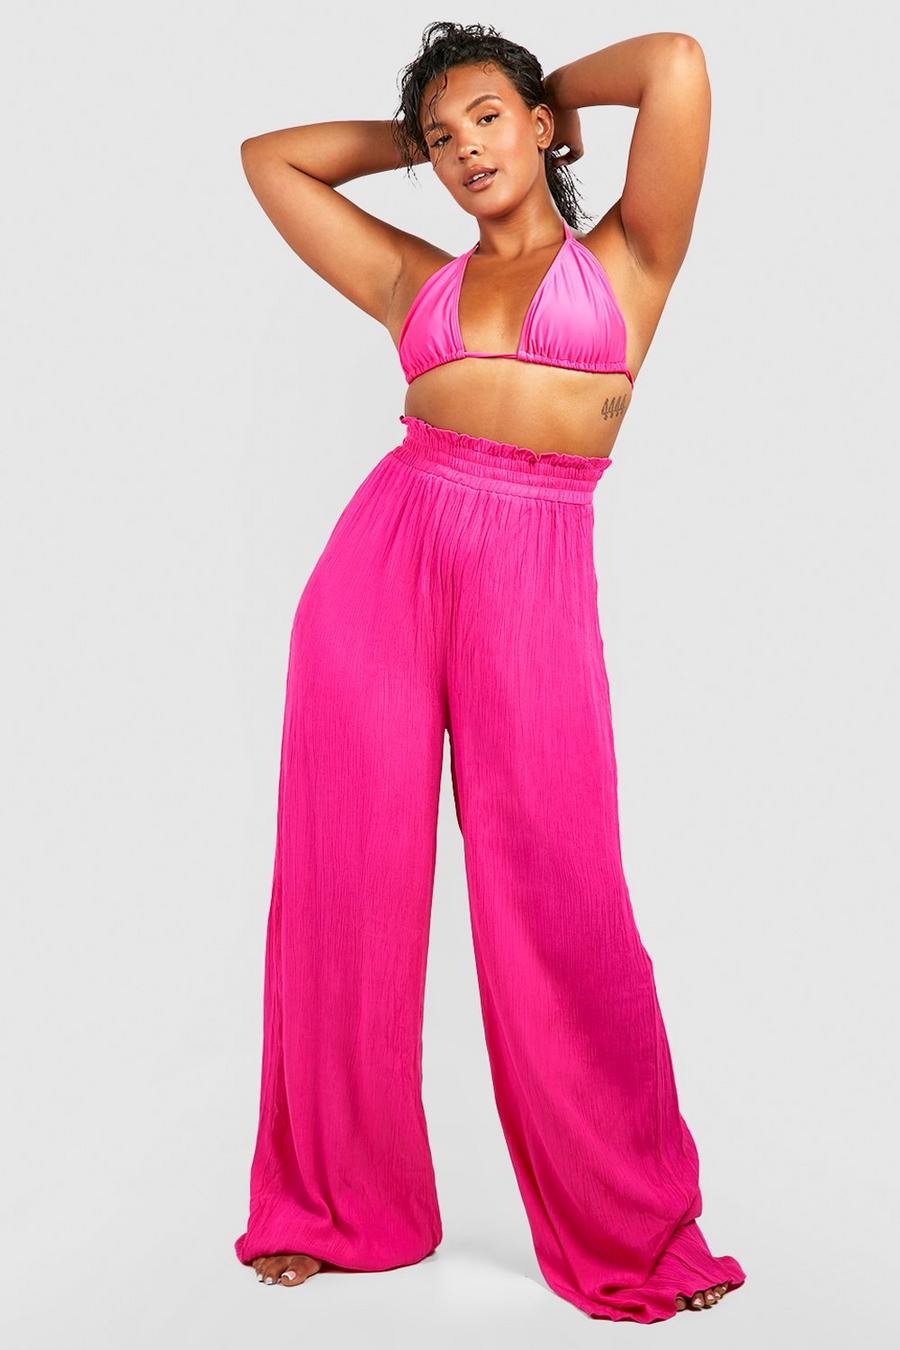 Pantaloni da mare Plus Size in rayon effetto goffrato, Hot pink image number 1